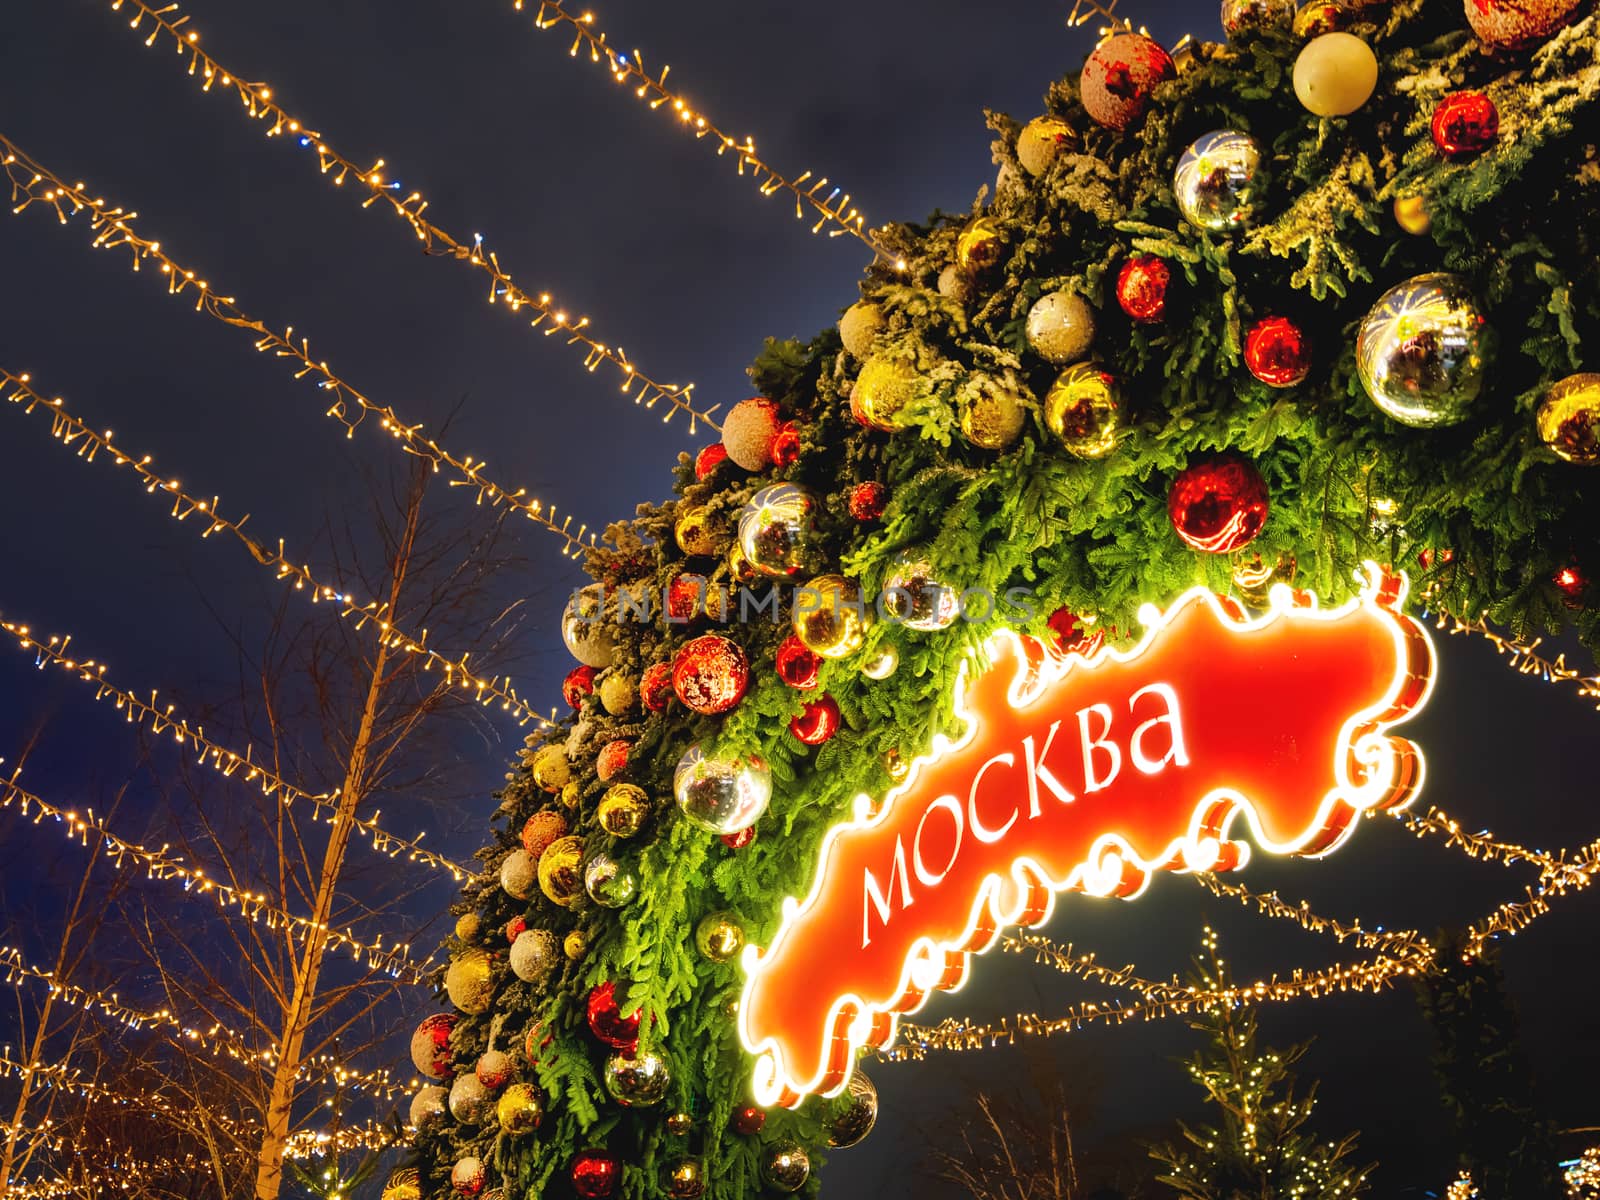 Decorative arch made of fir tree branches with colorful balls and sign with MOSCOW word on it. Outdoor Christmas decorations for New Year celebration. Moscow, Russia.